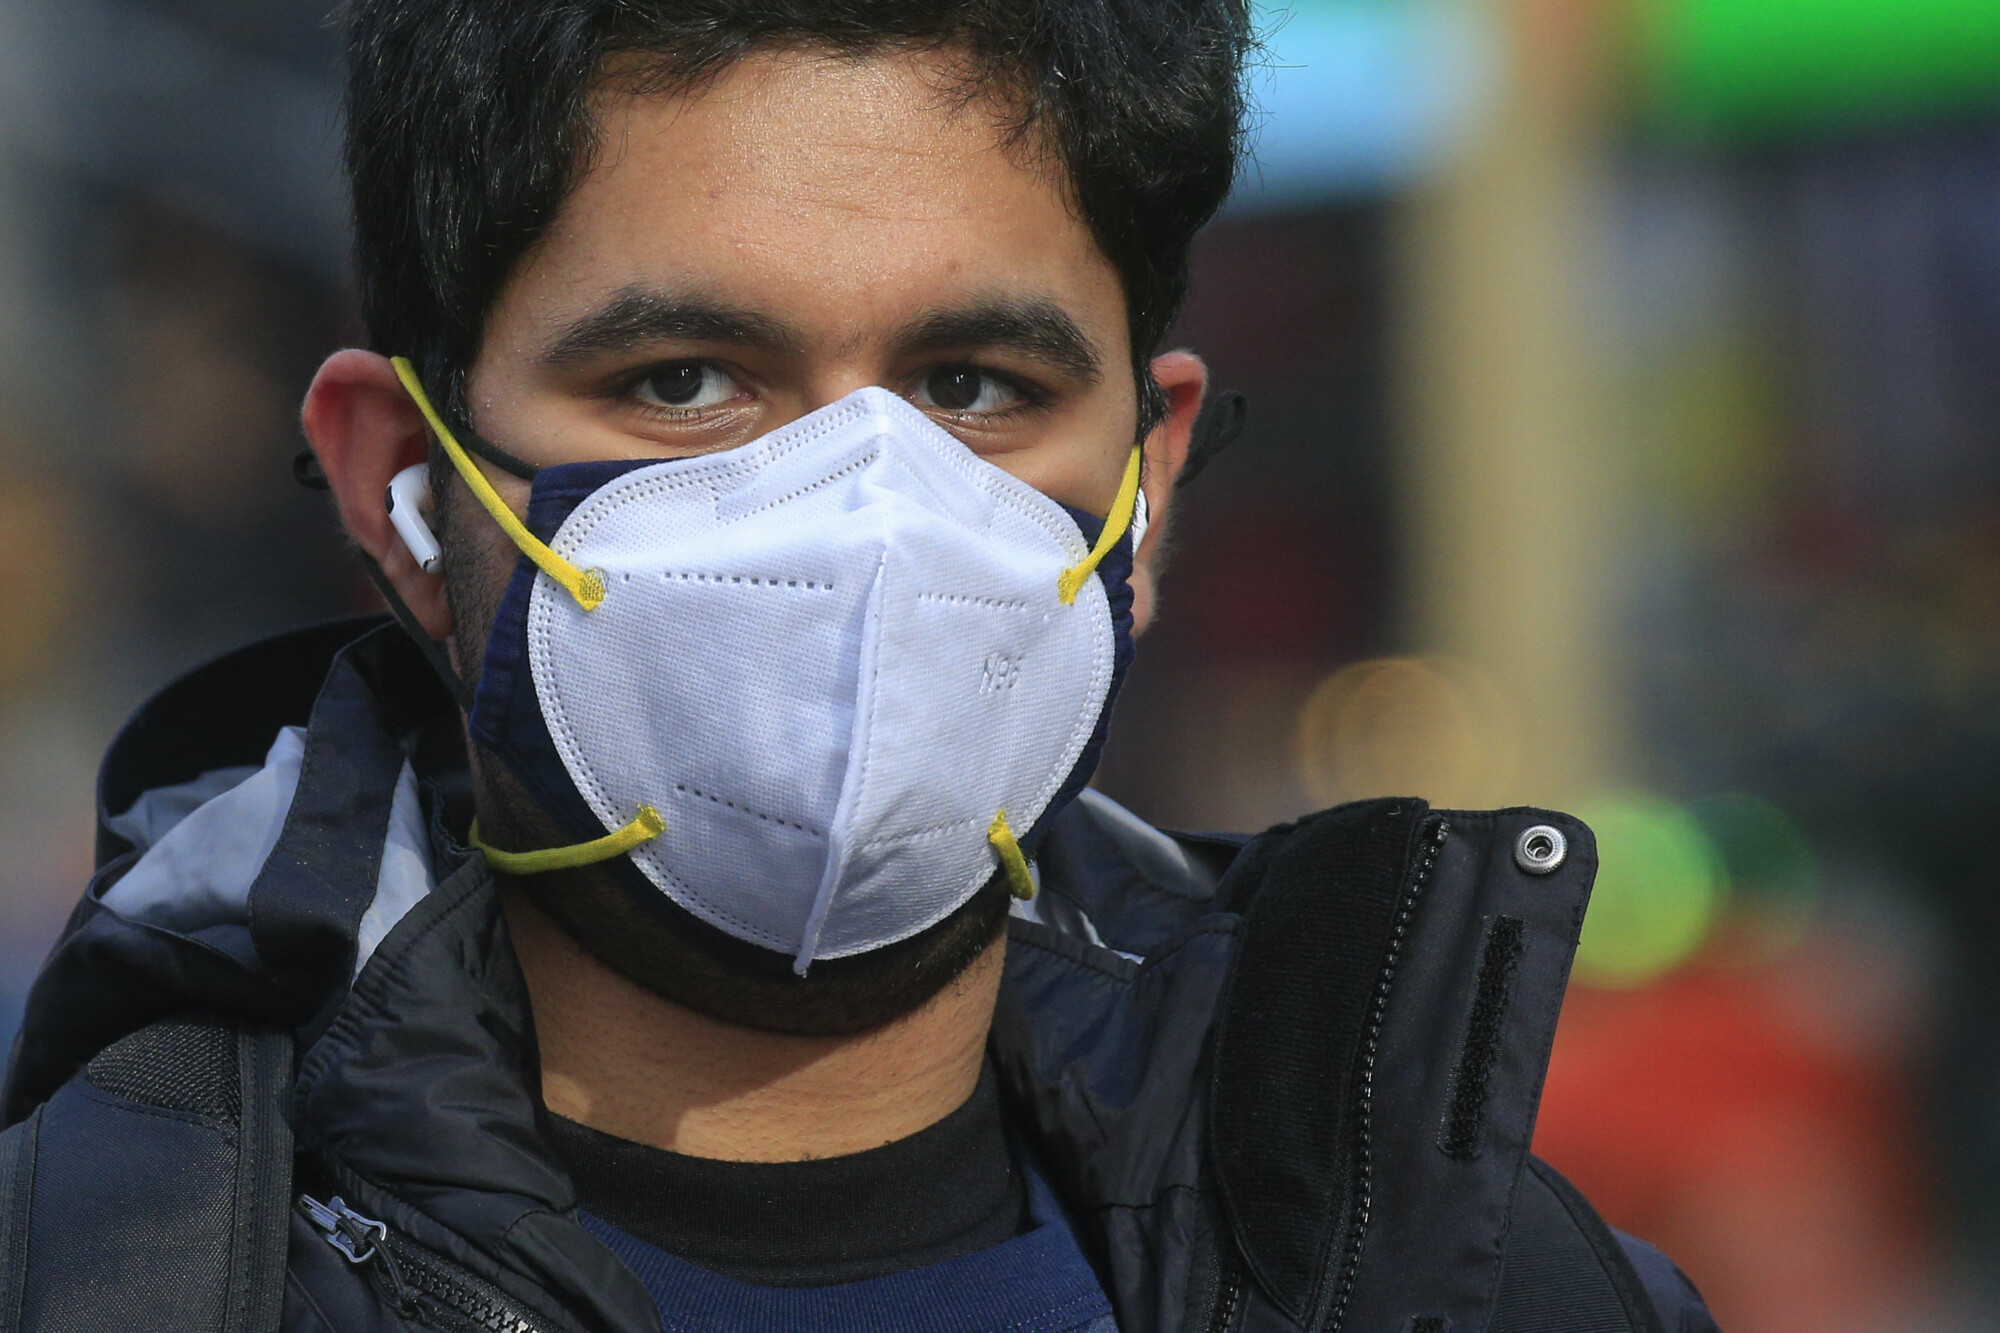 CDC Recommends Double Masking in New Guidelines With Surgical, Cloth Combo